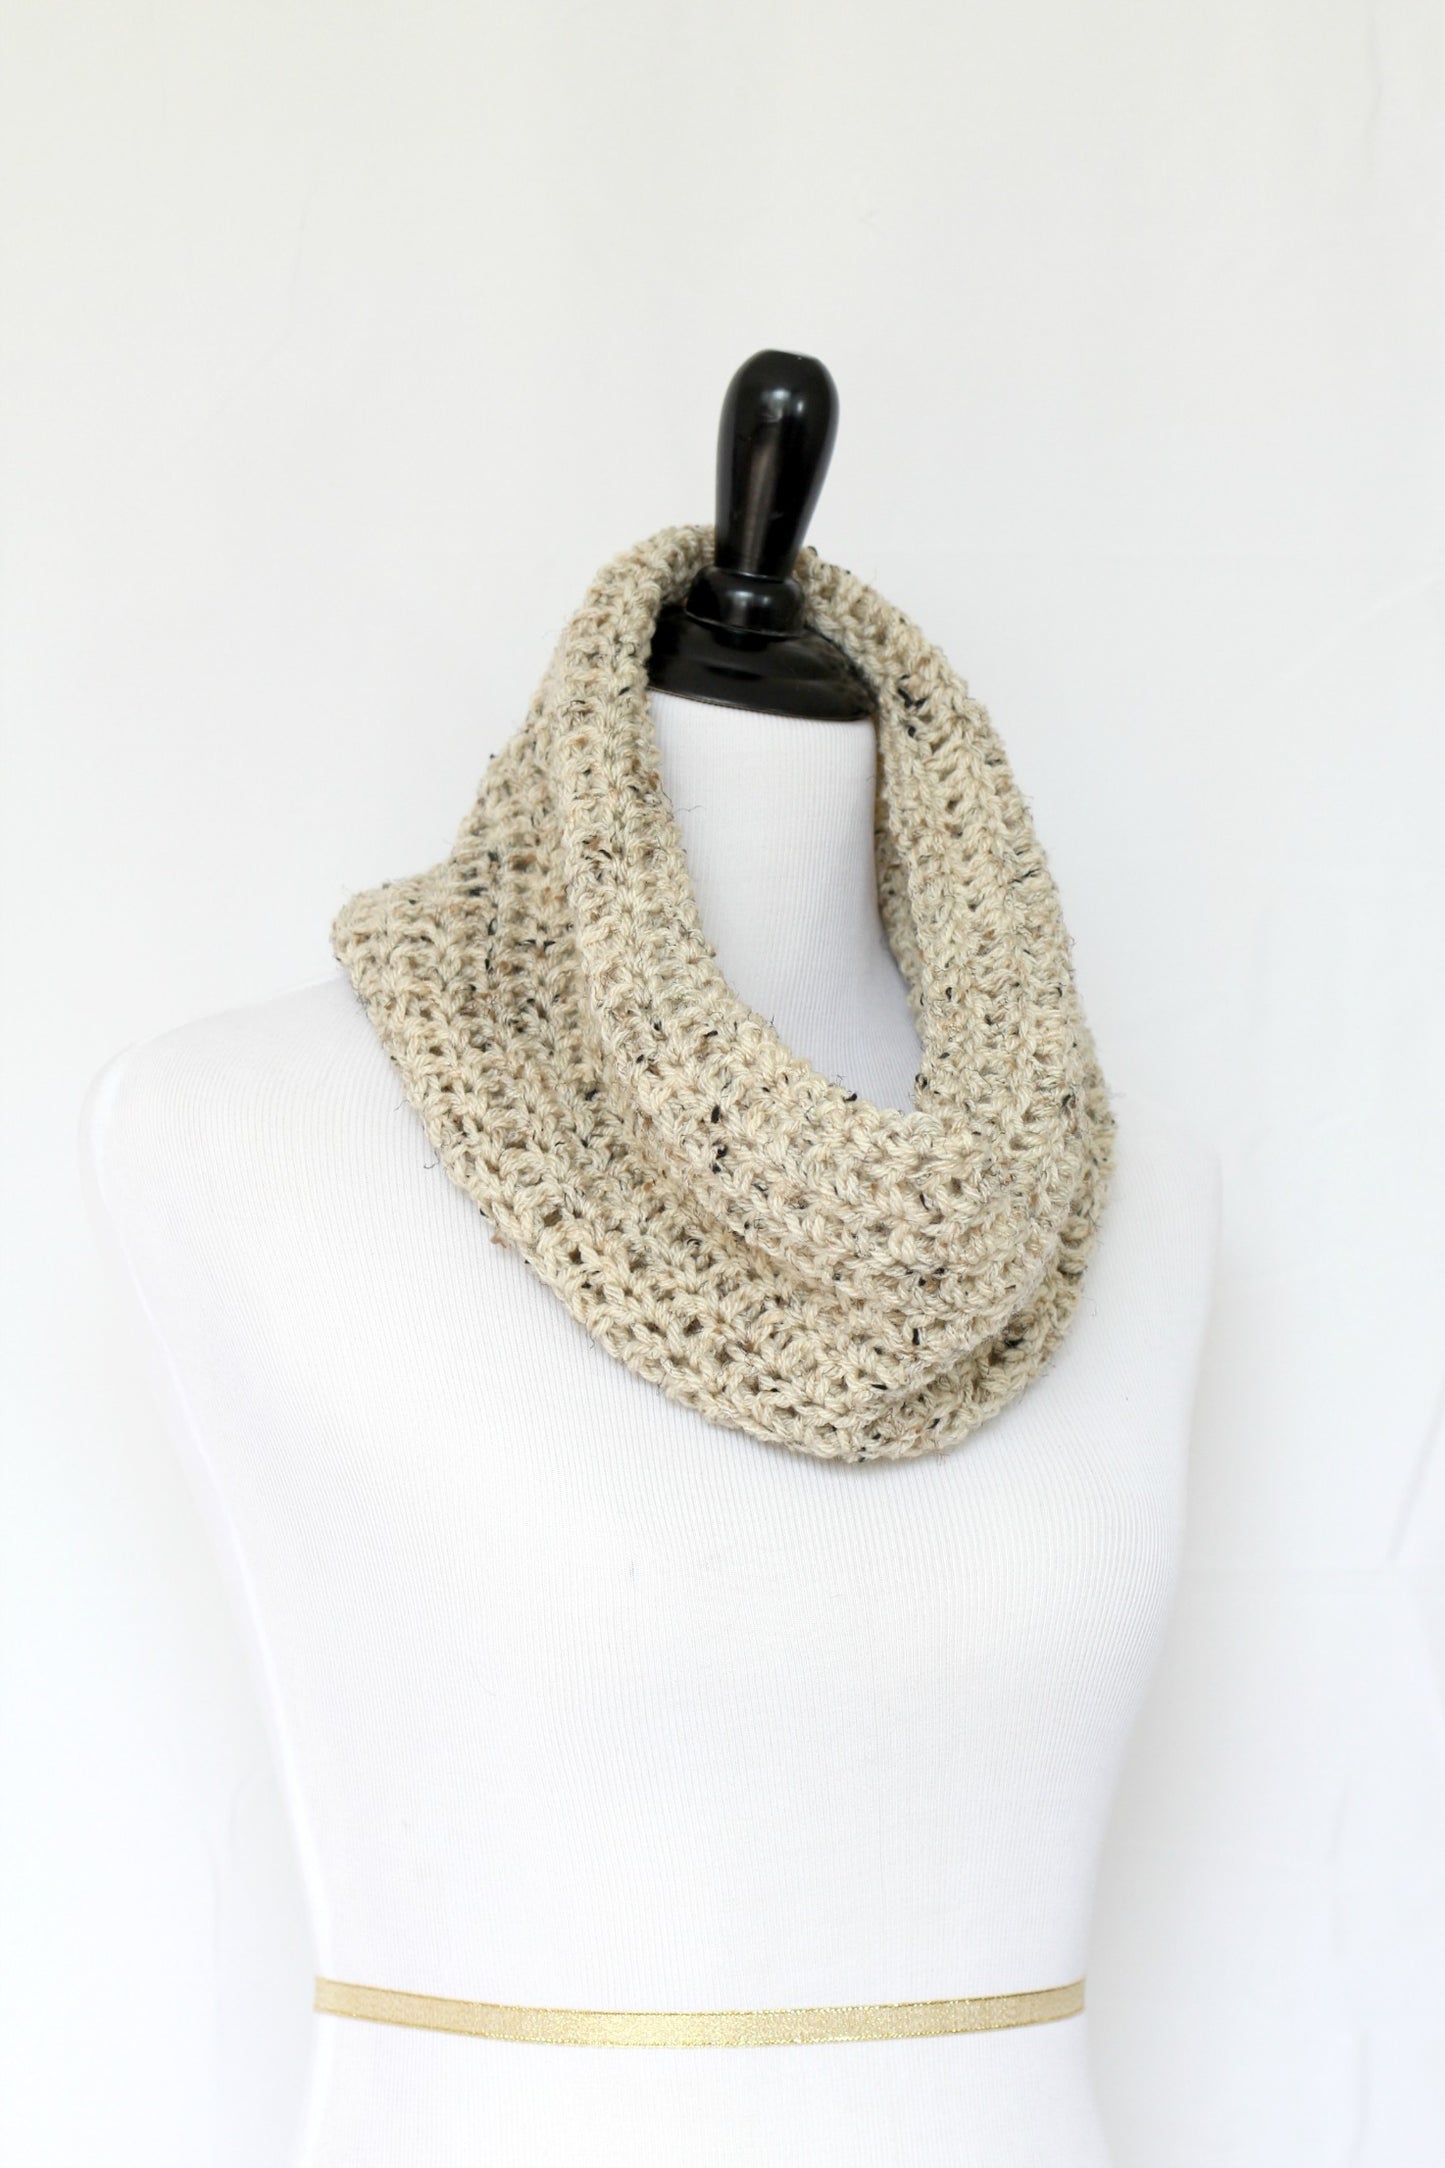 Crochet infinity scarf in beige color, chunky cowl - 12 colors available